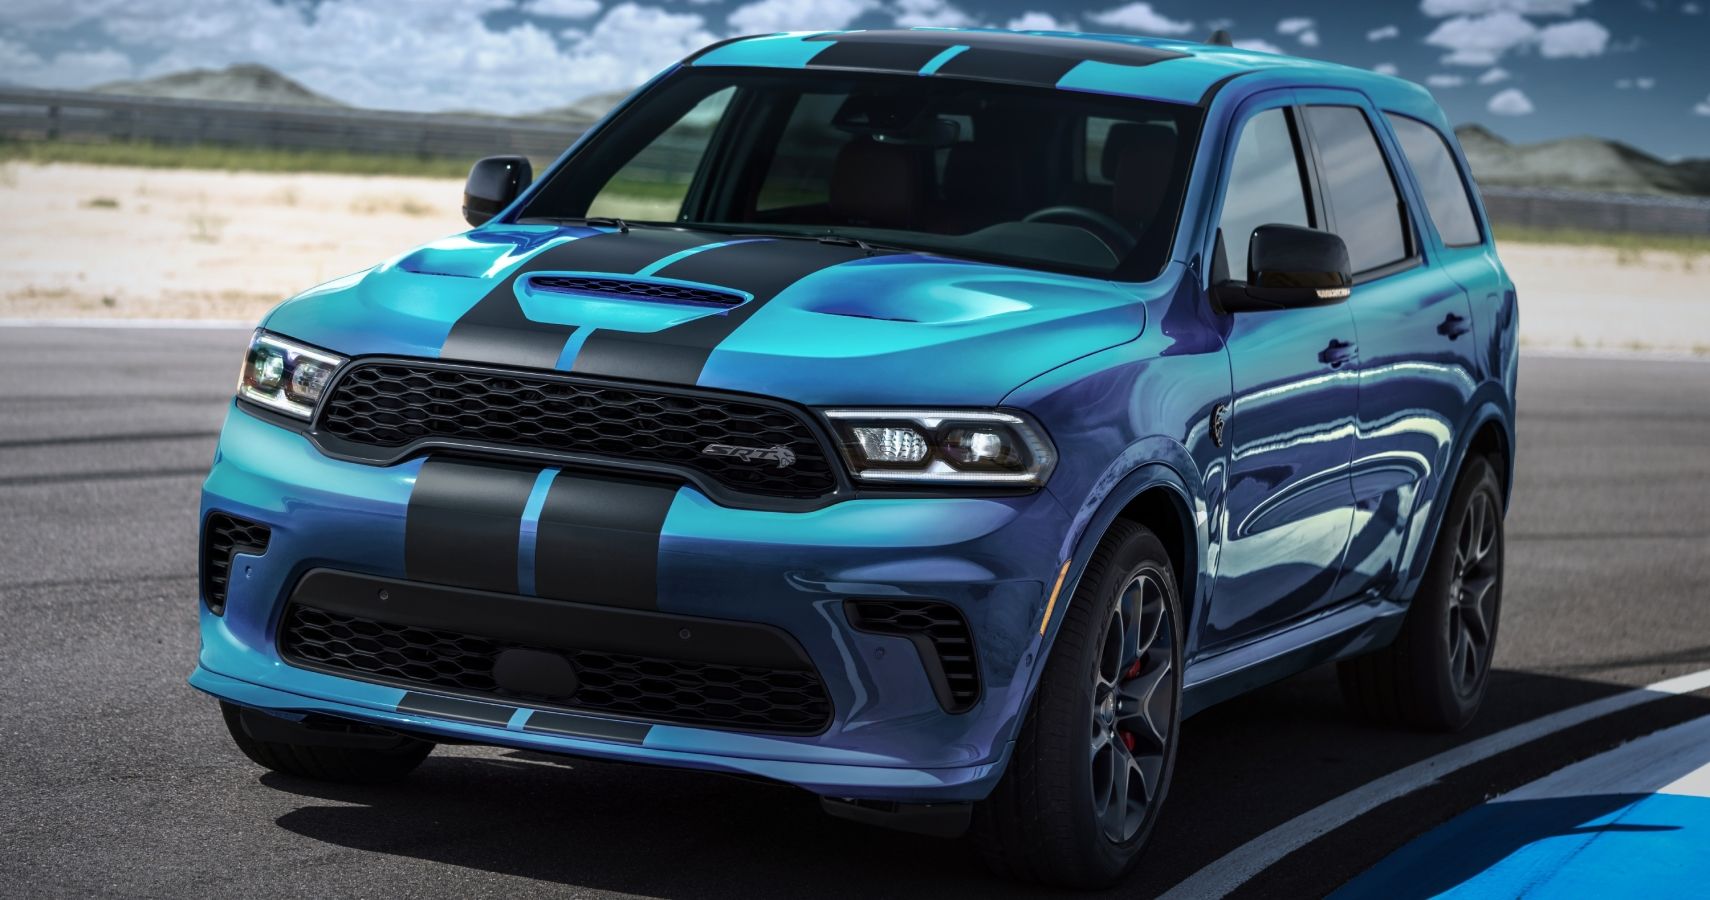 2023 Durango SRT Hellcat Front View In Blue With Black Stripes